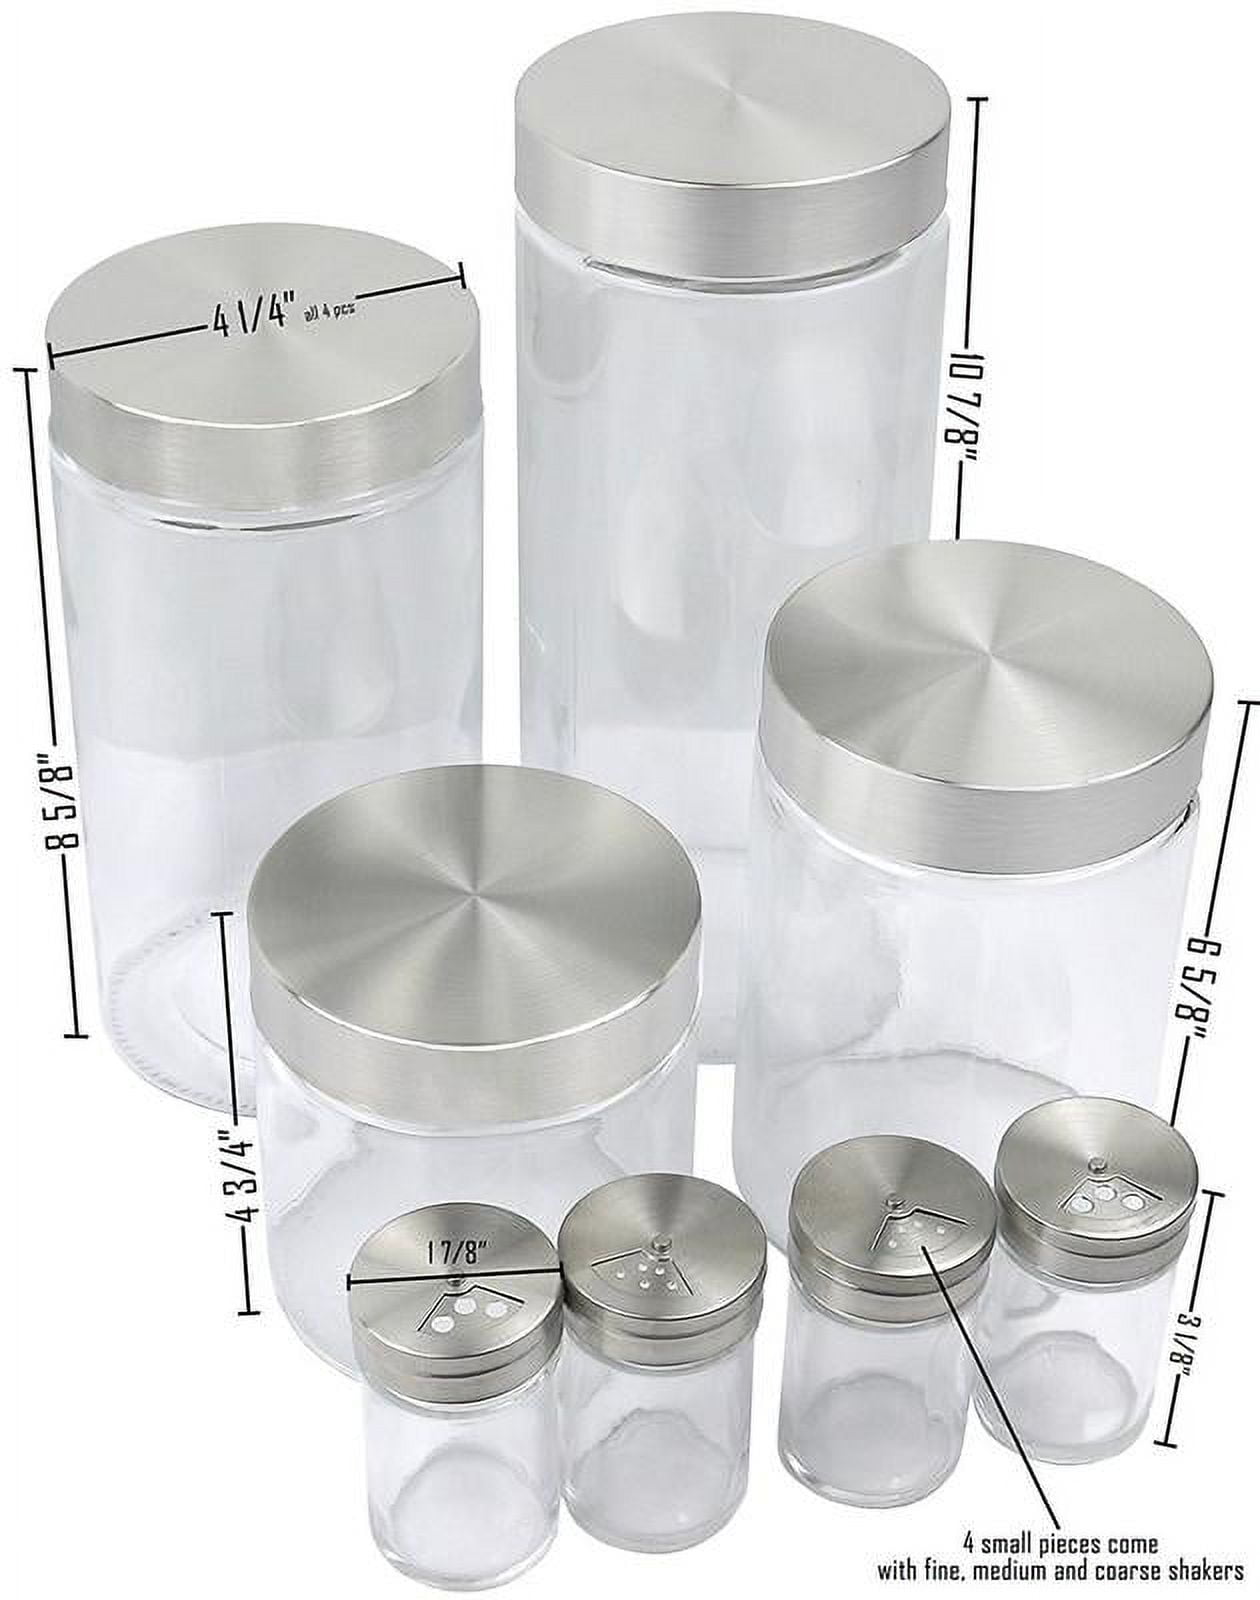  Zopeal 8 Pack Kitchen Canister Set Stainless Steel